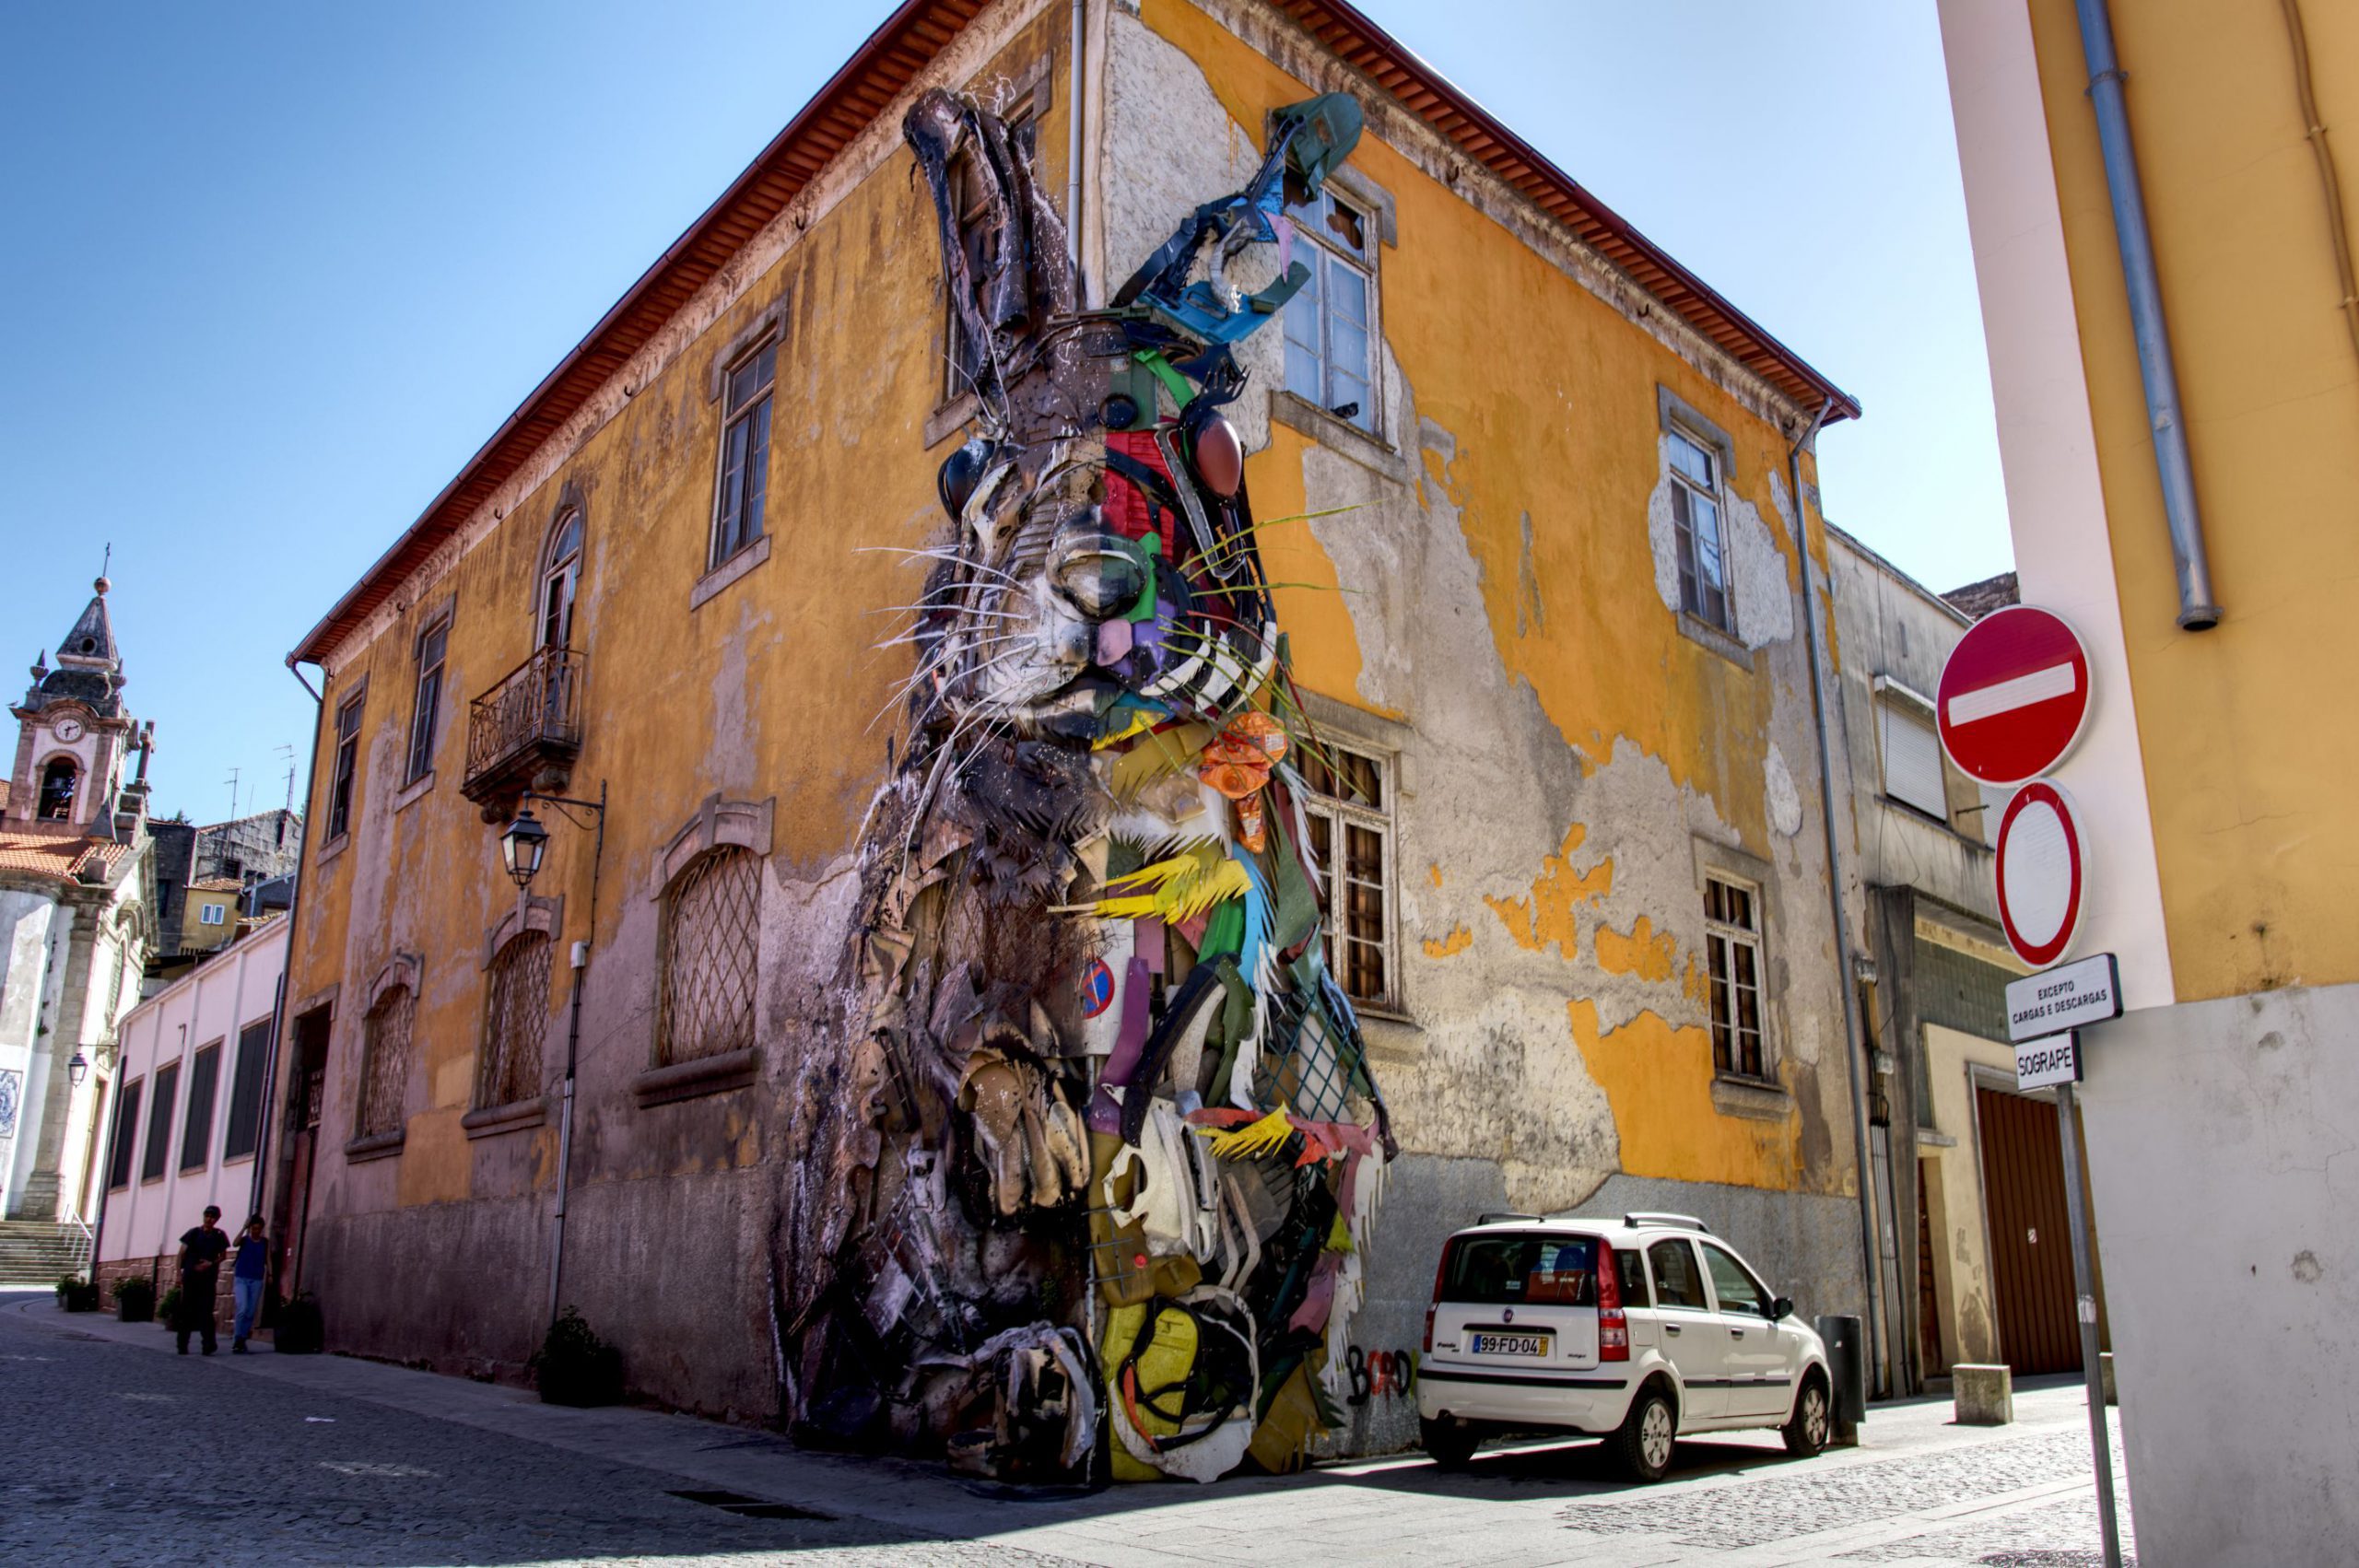 On the Gaia side of the Douro River you will find numerous street art installations